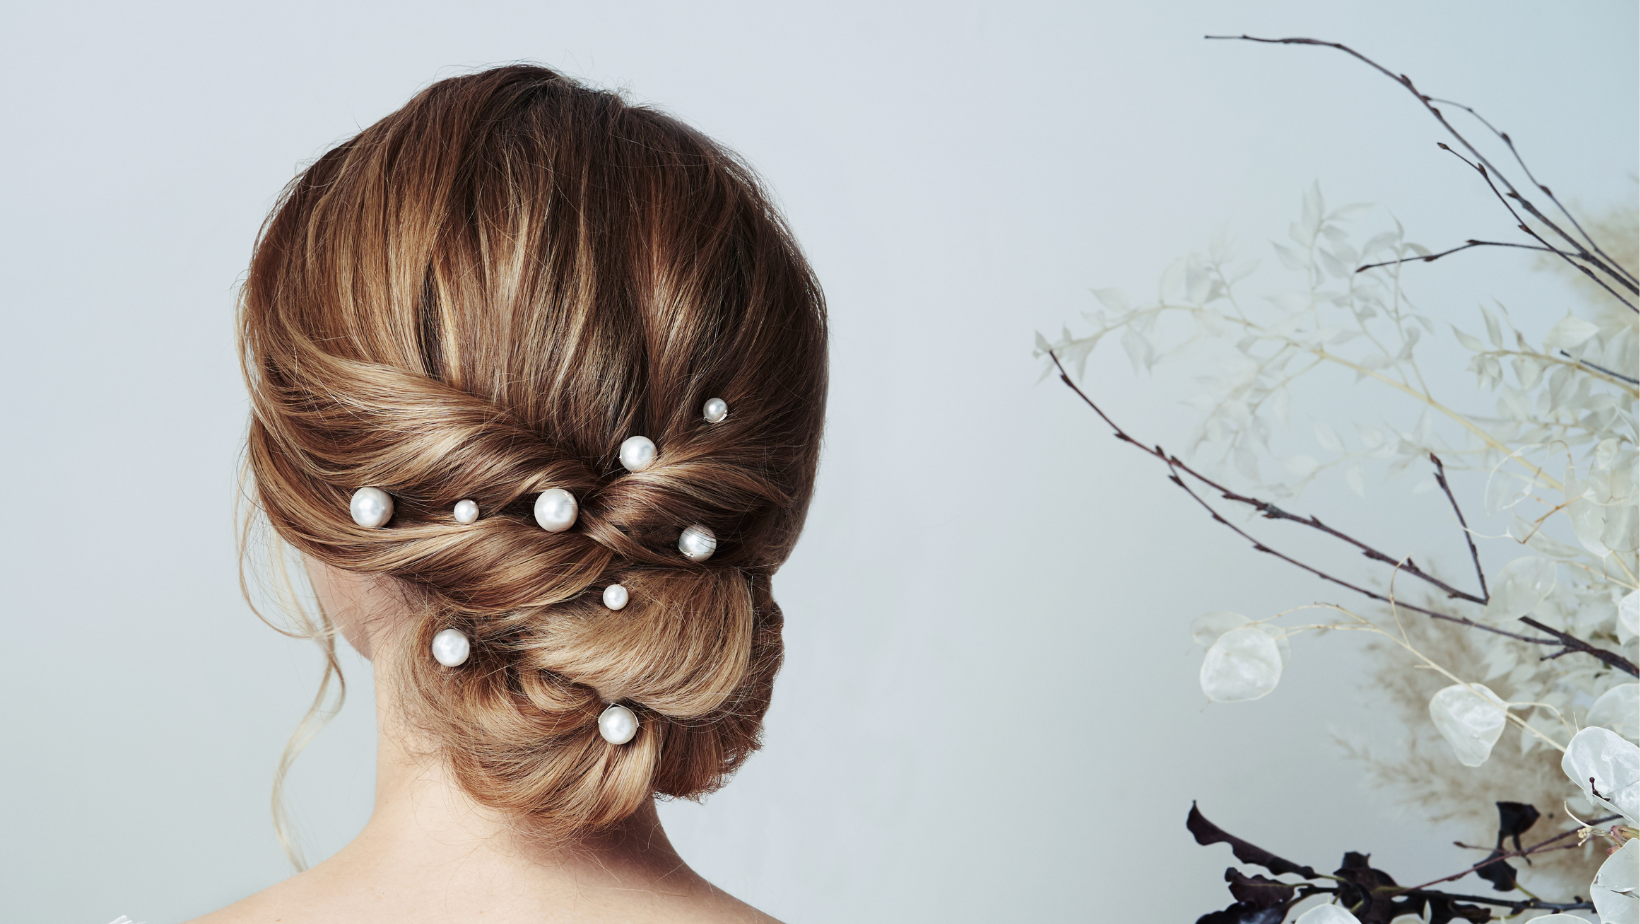 Model with twisted low bun wears a set of nine scattered pearl hairpins in three sizes, small, medium and large